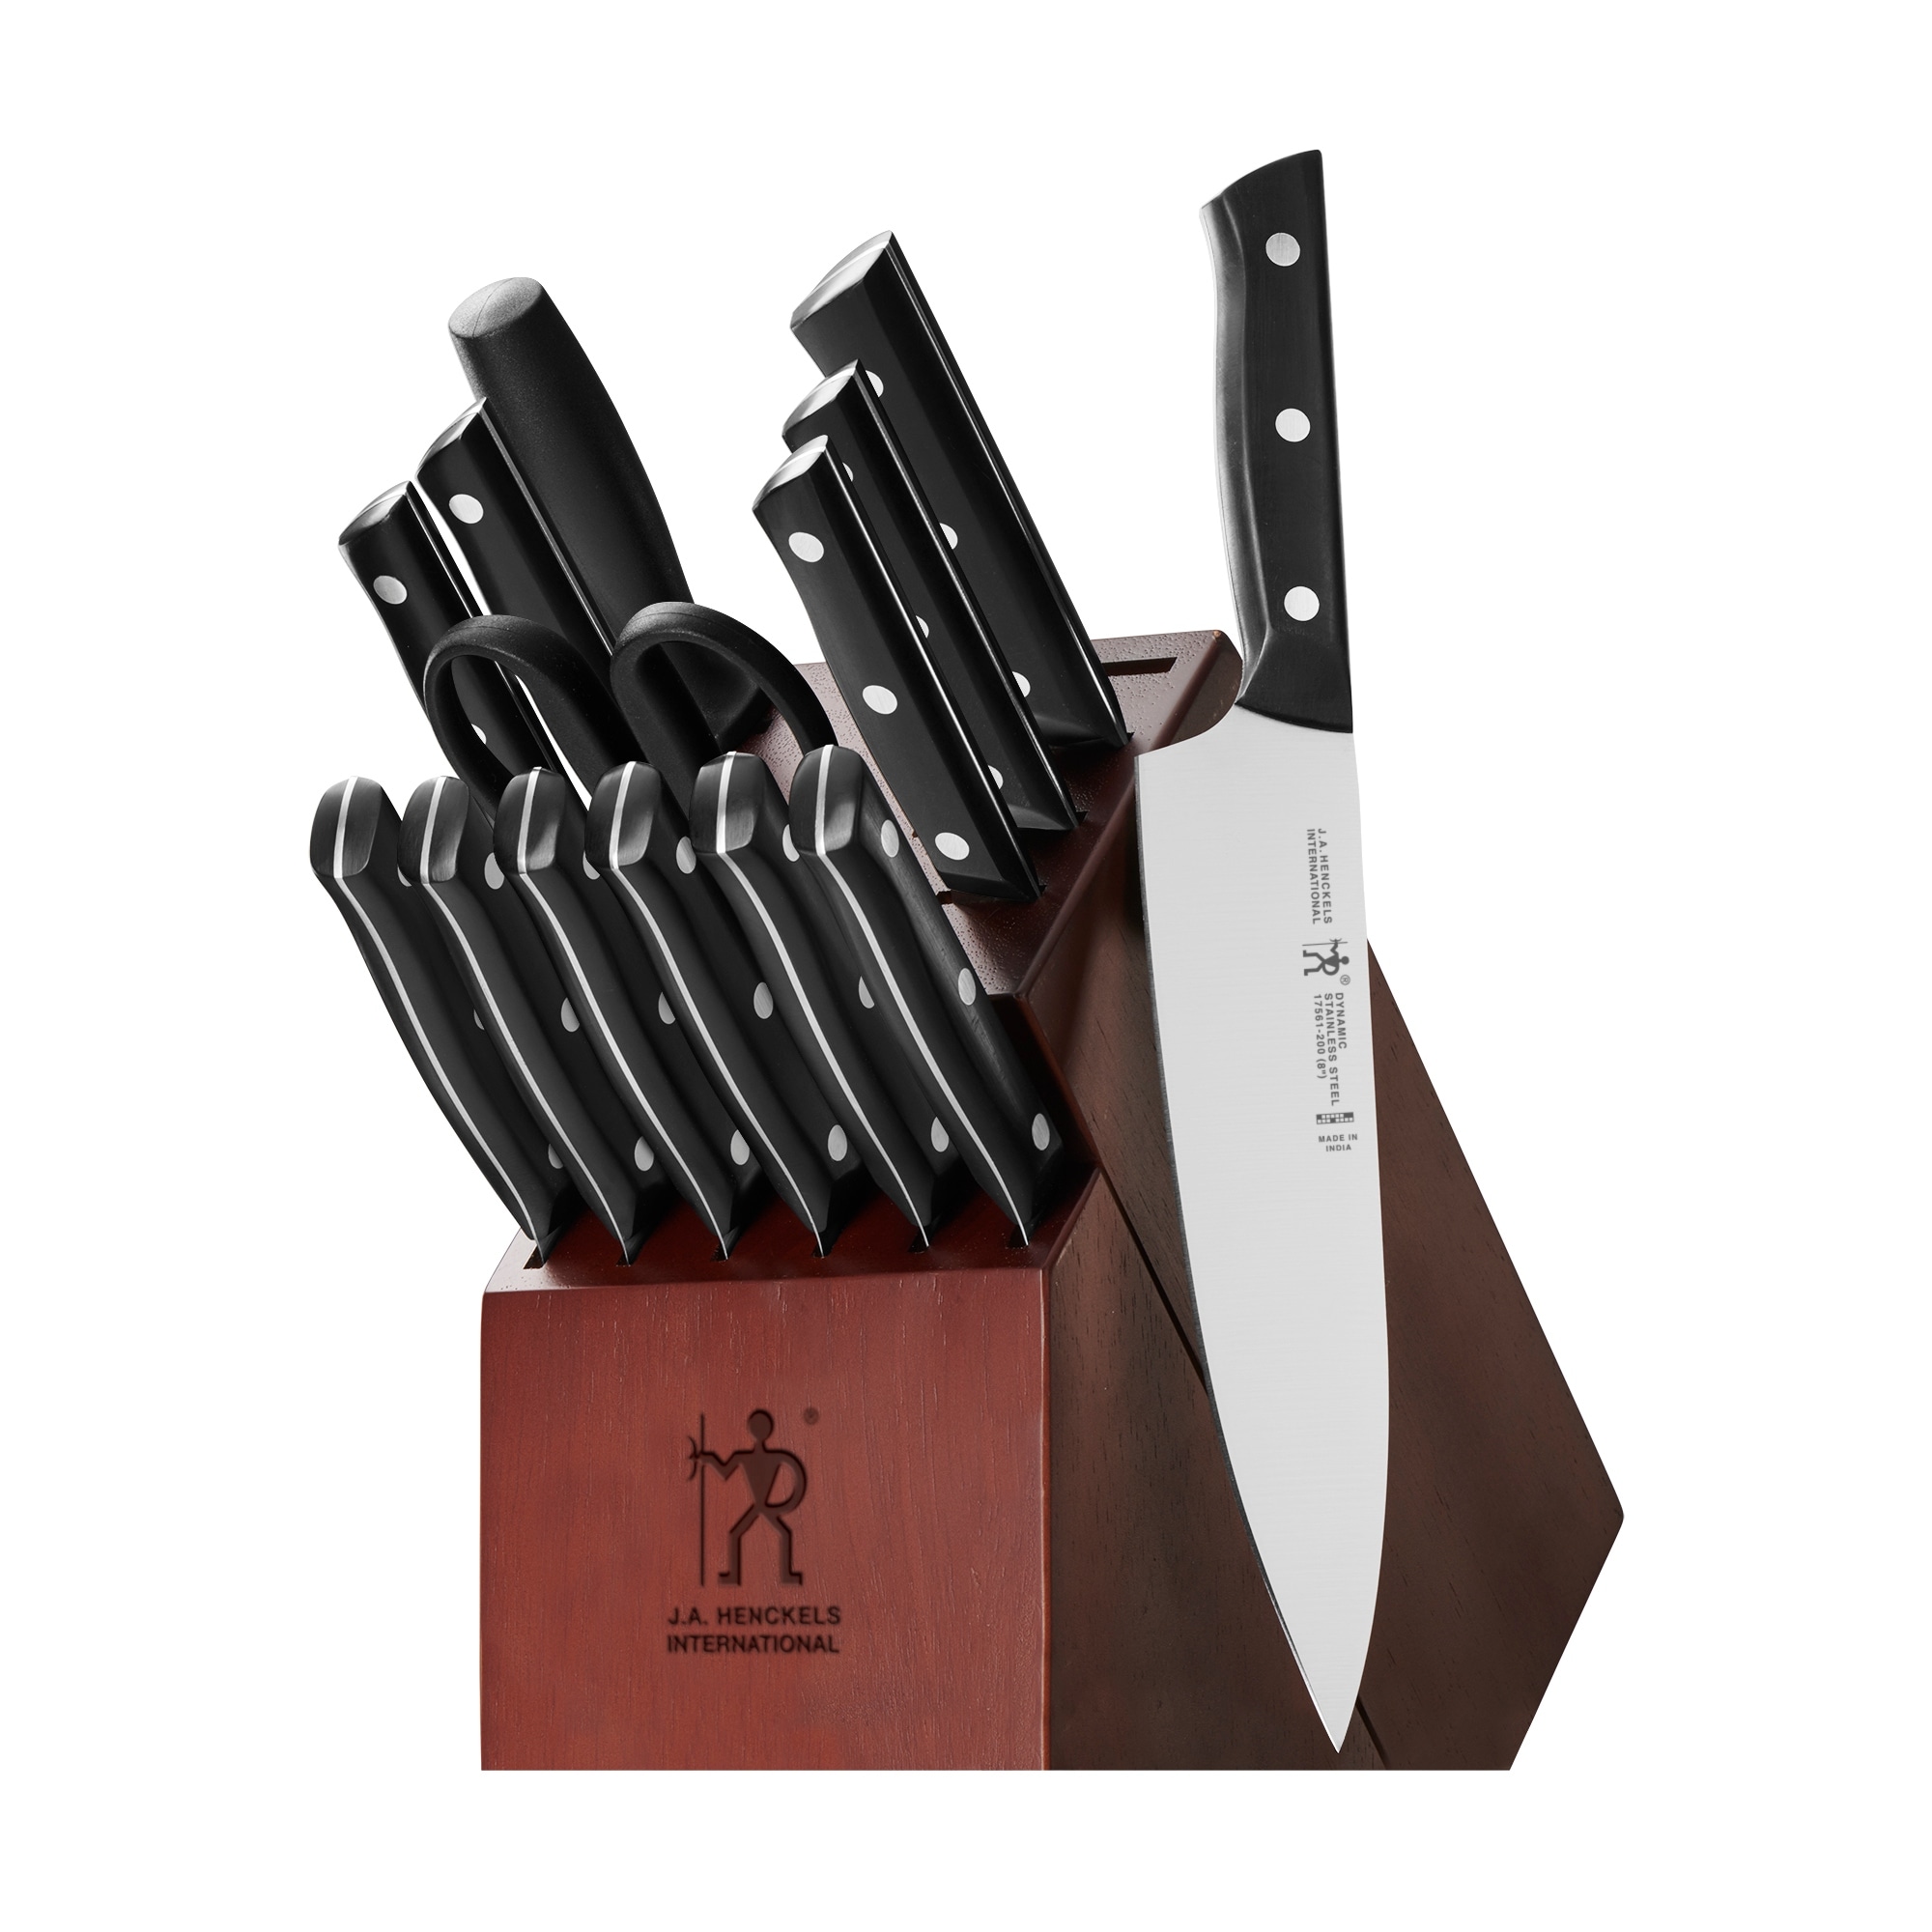 GINSU Black Handle Knife Set of 11 Knives With Wooden Block Not